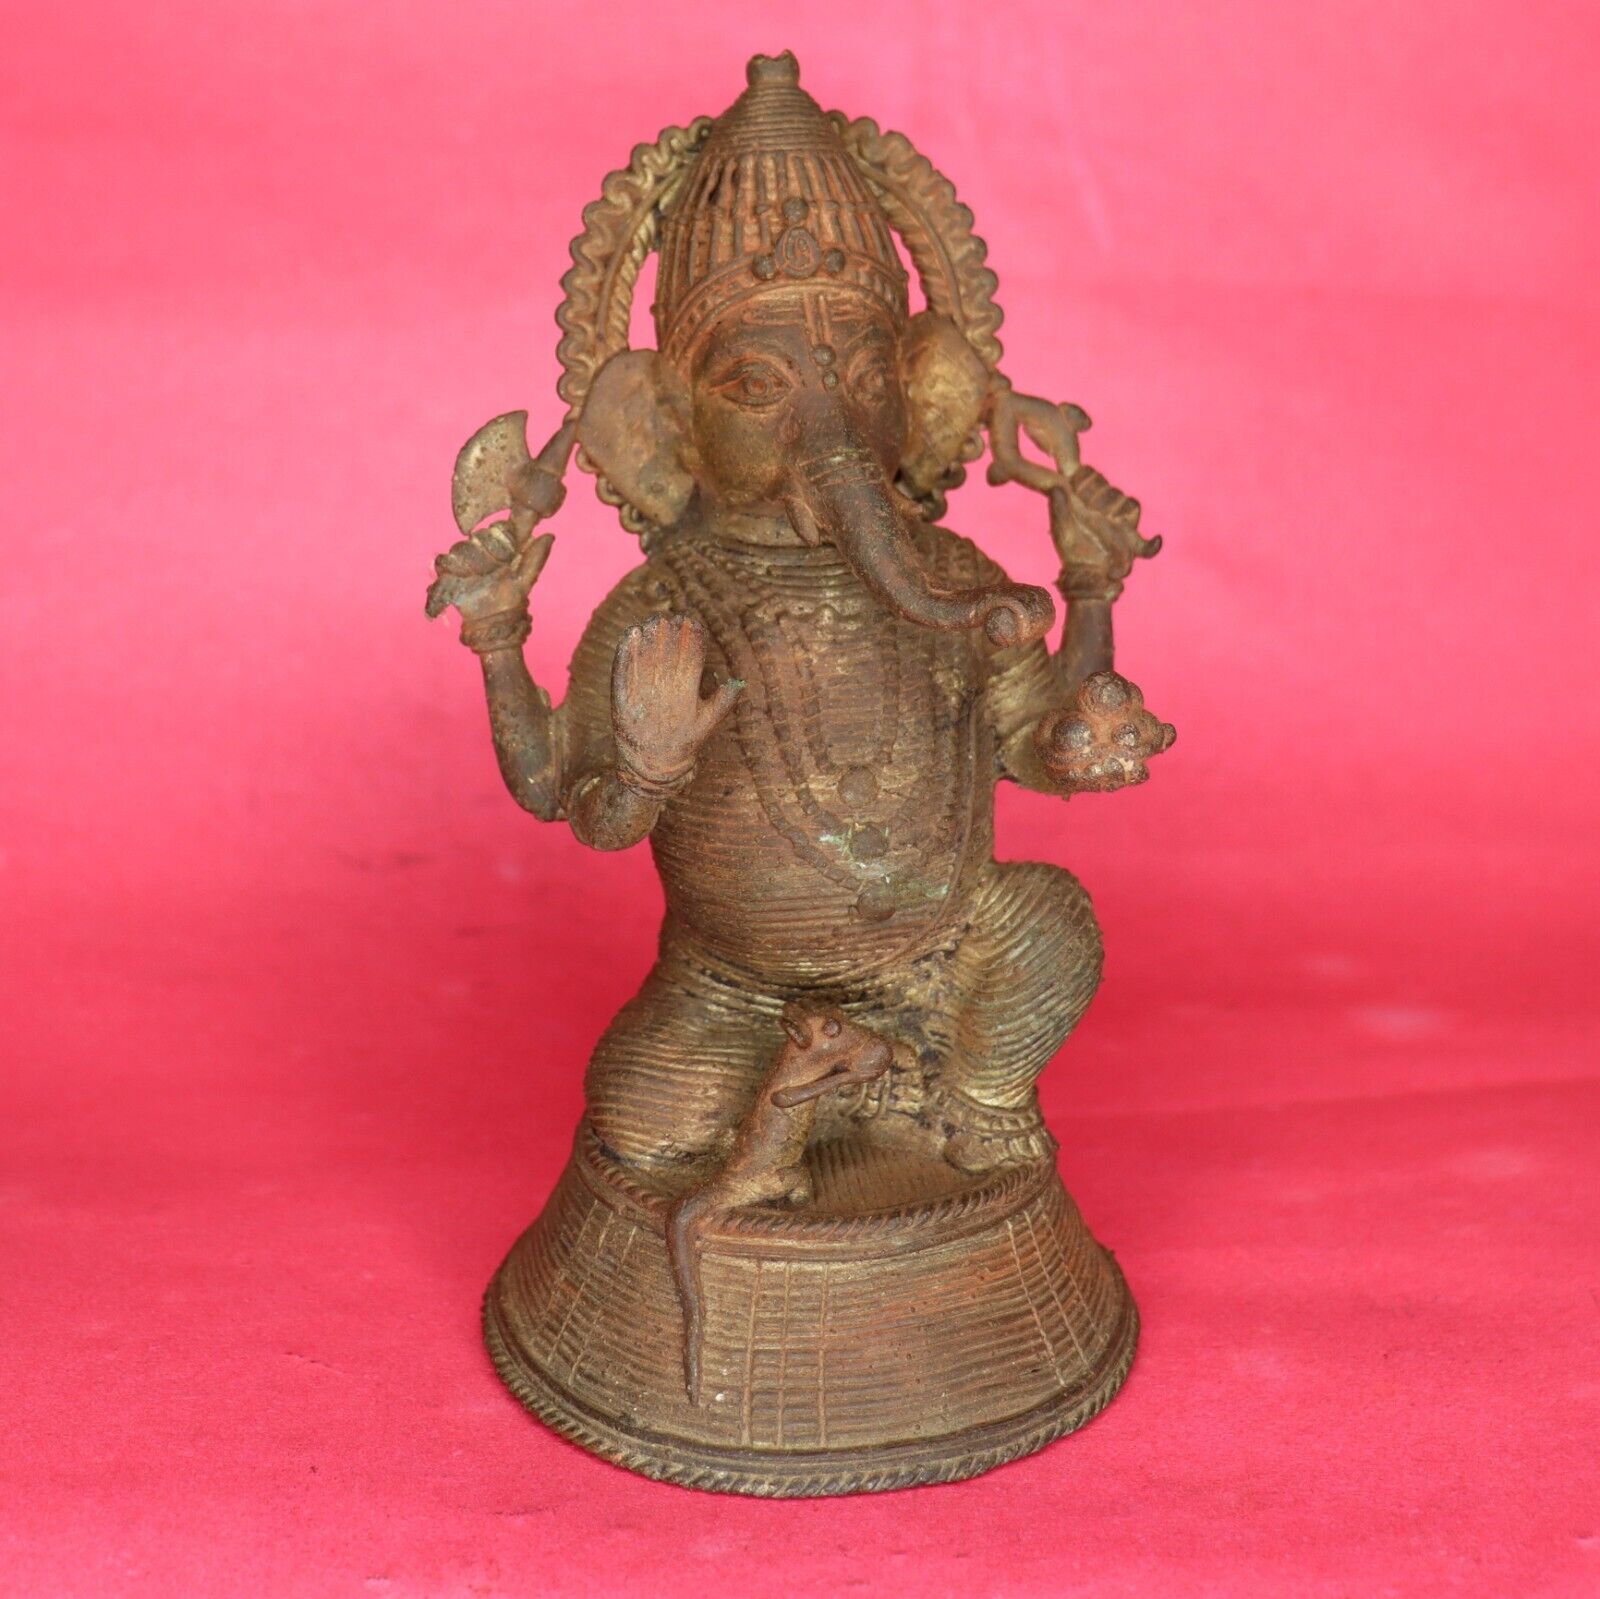 Handcrafted Old Seated Lord Ganesha Figurine Victorian Statue Figure Sculpture